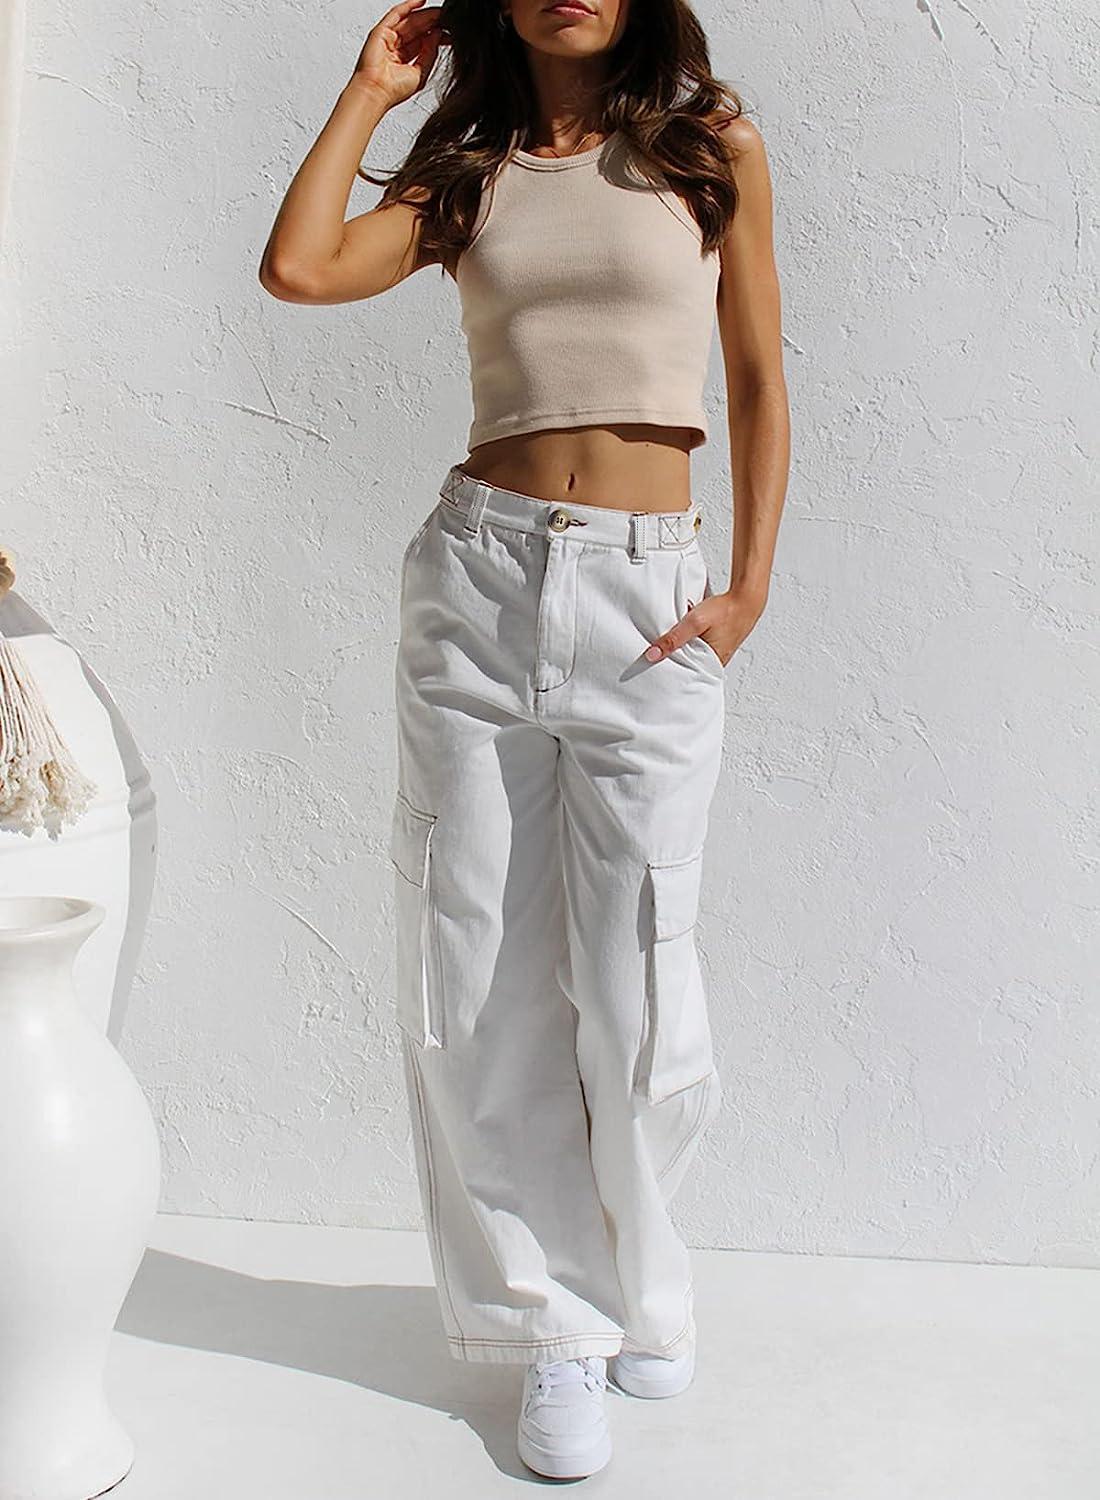 EVALESS Cargo Pants Women Casual Loose High Waisted Straight Leg Baggy  Pants Trousers with Pockets 6 A White